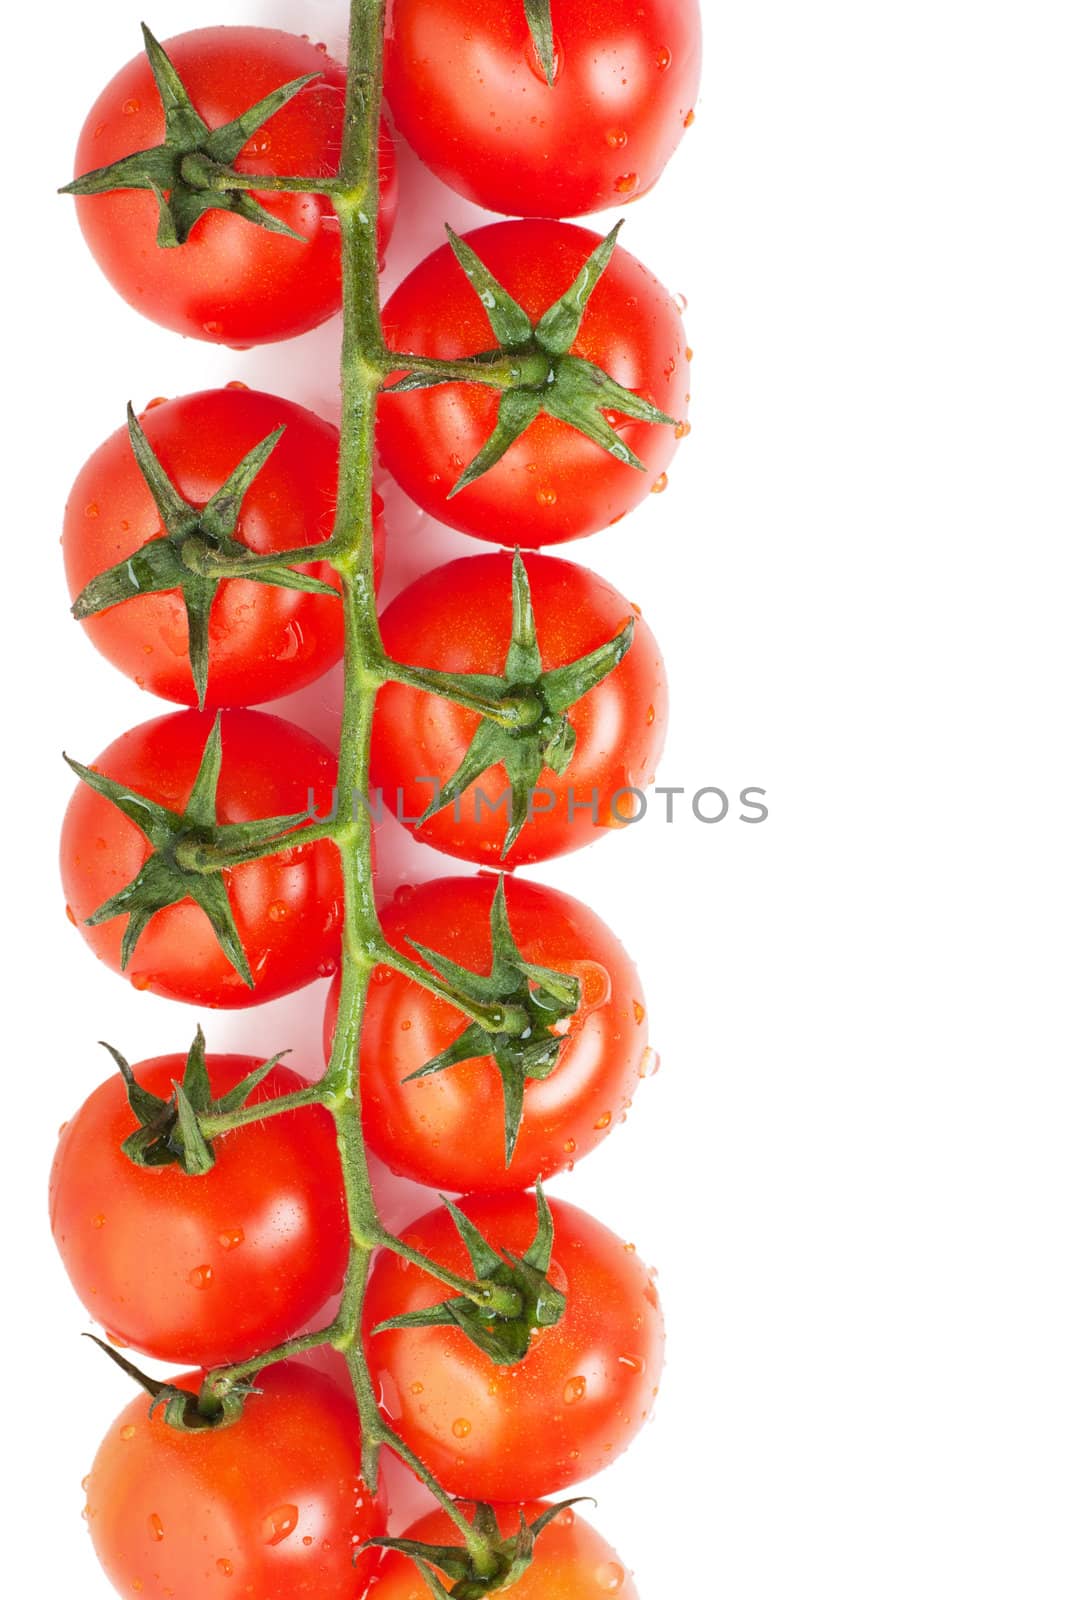 Some fresh ripe cherry tomatoes on a branch isolated over white background